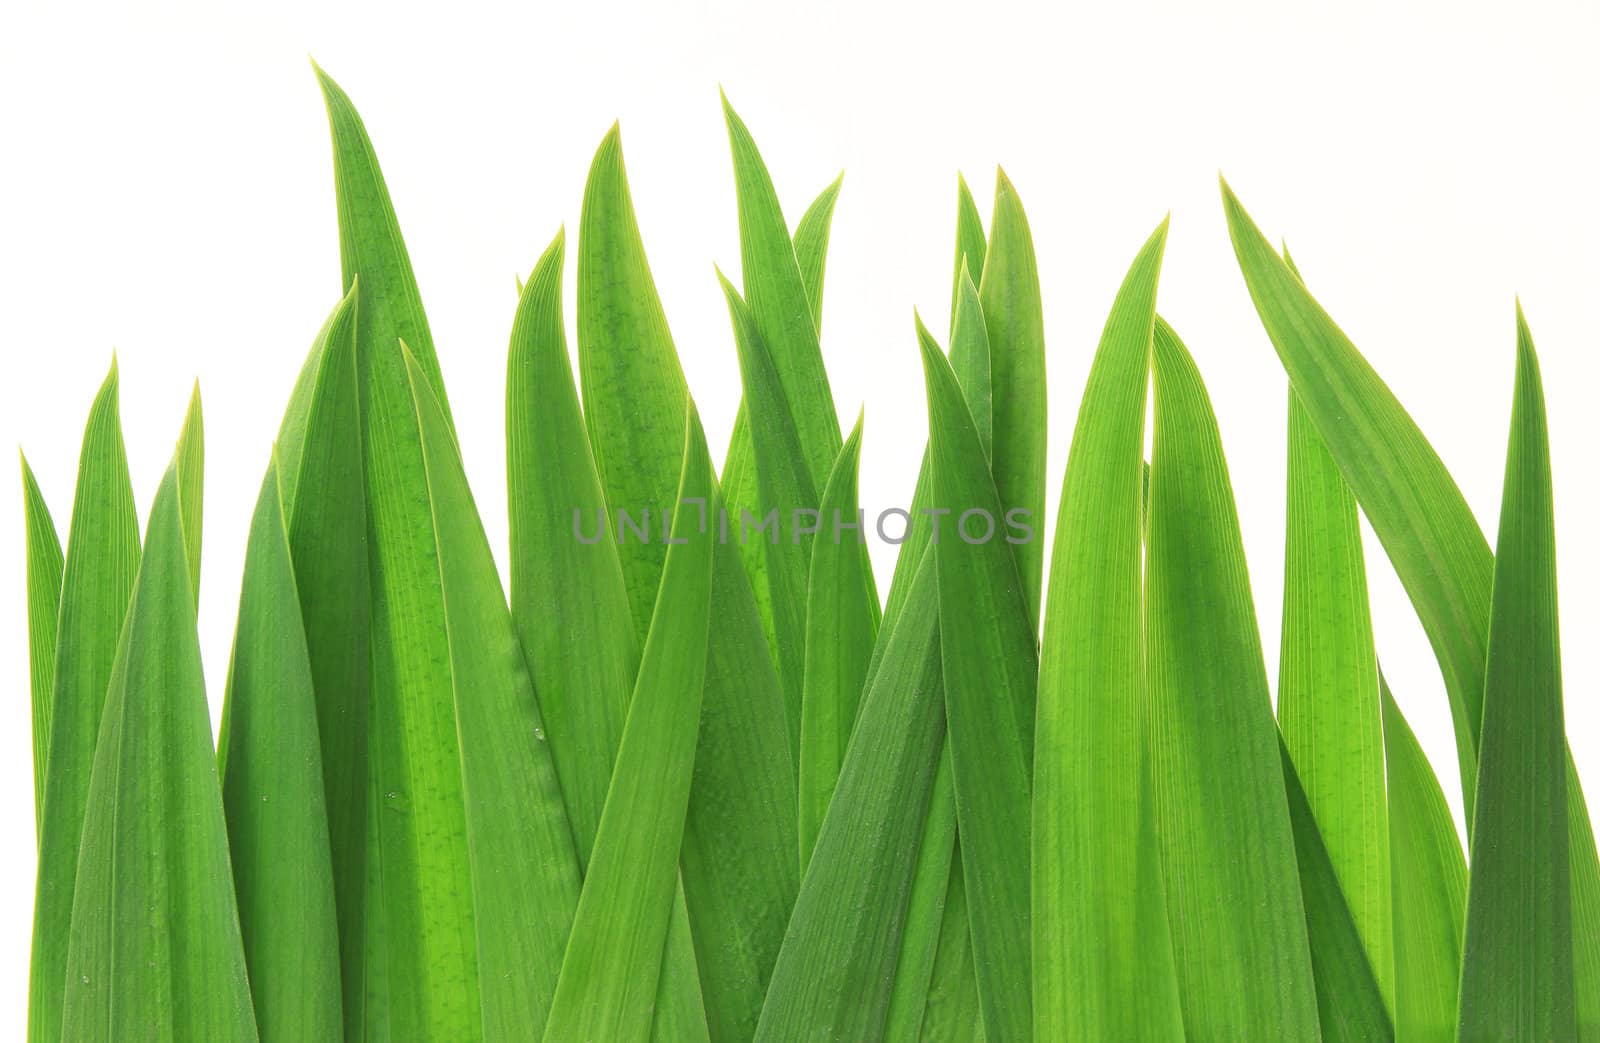 Green grass isolated on white background - many uses for environment related.